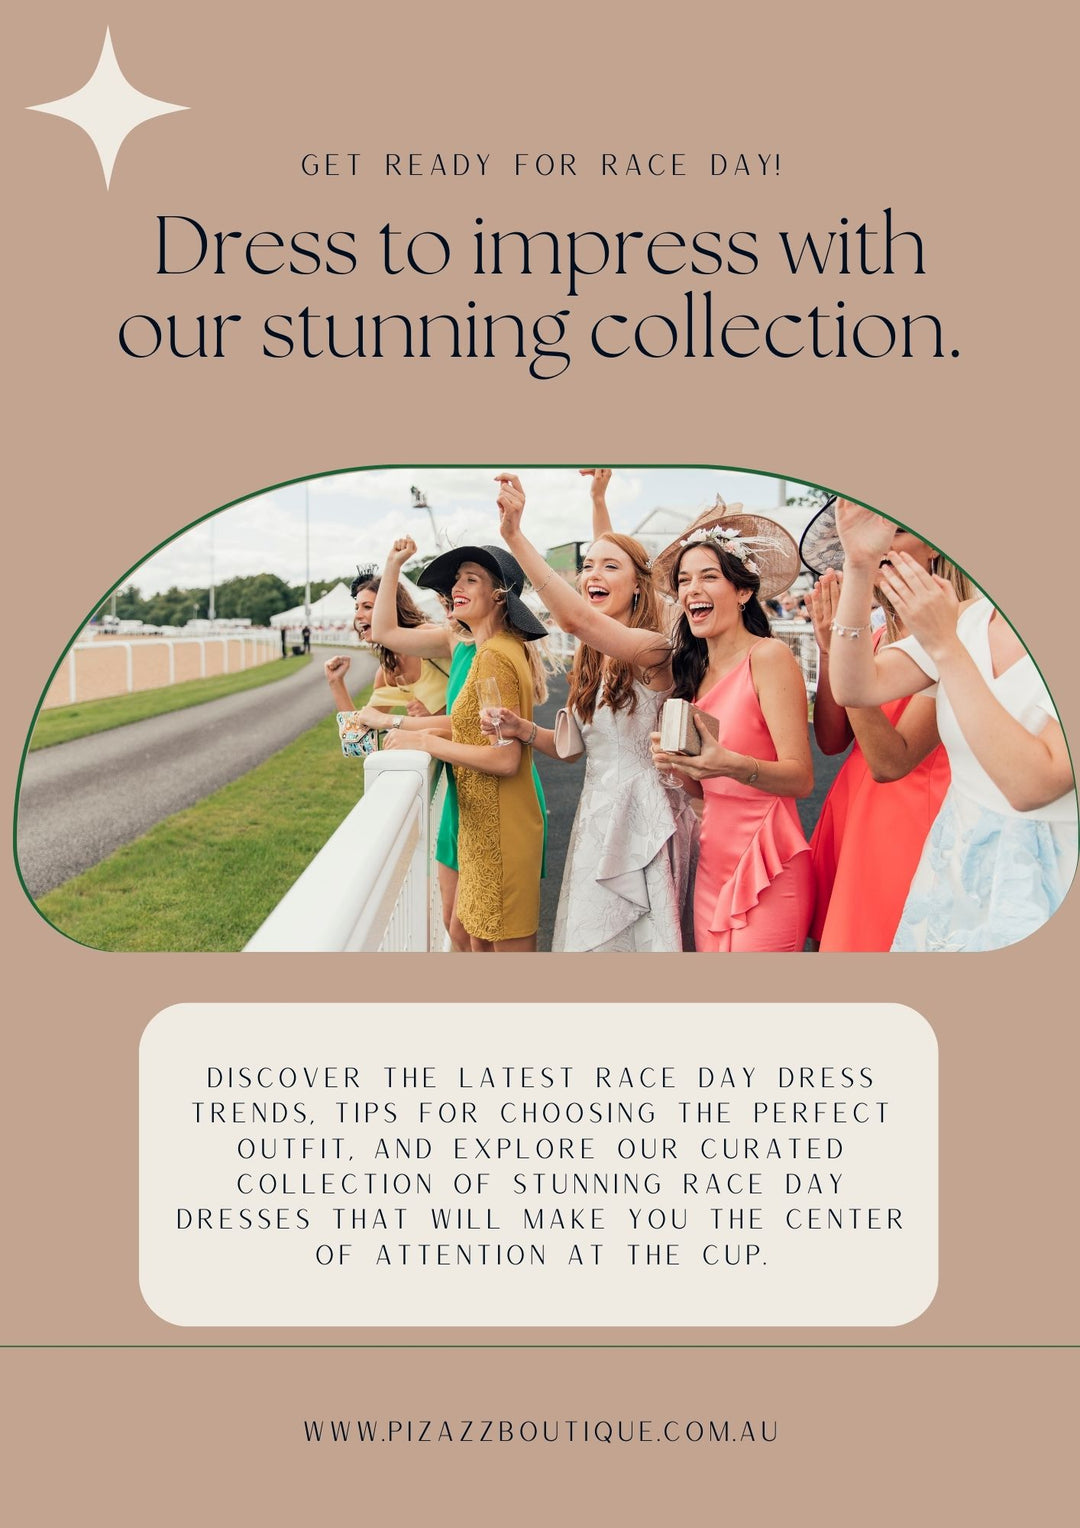 Race day dresses - what to wear to the next race day